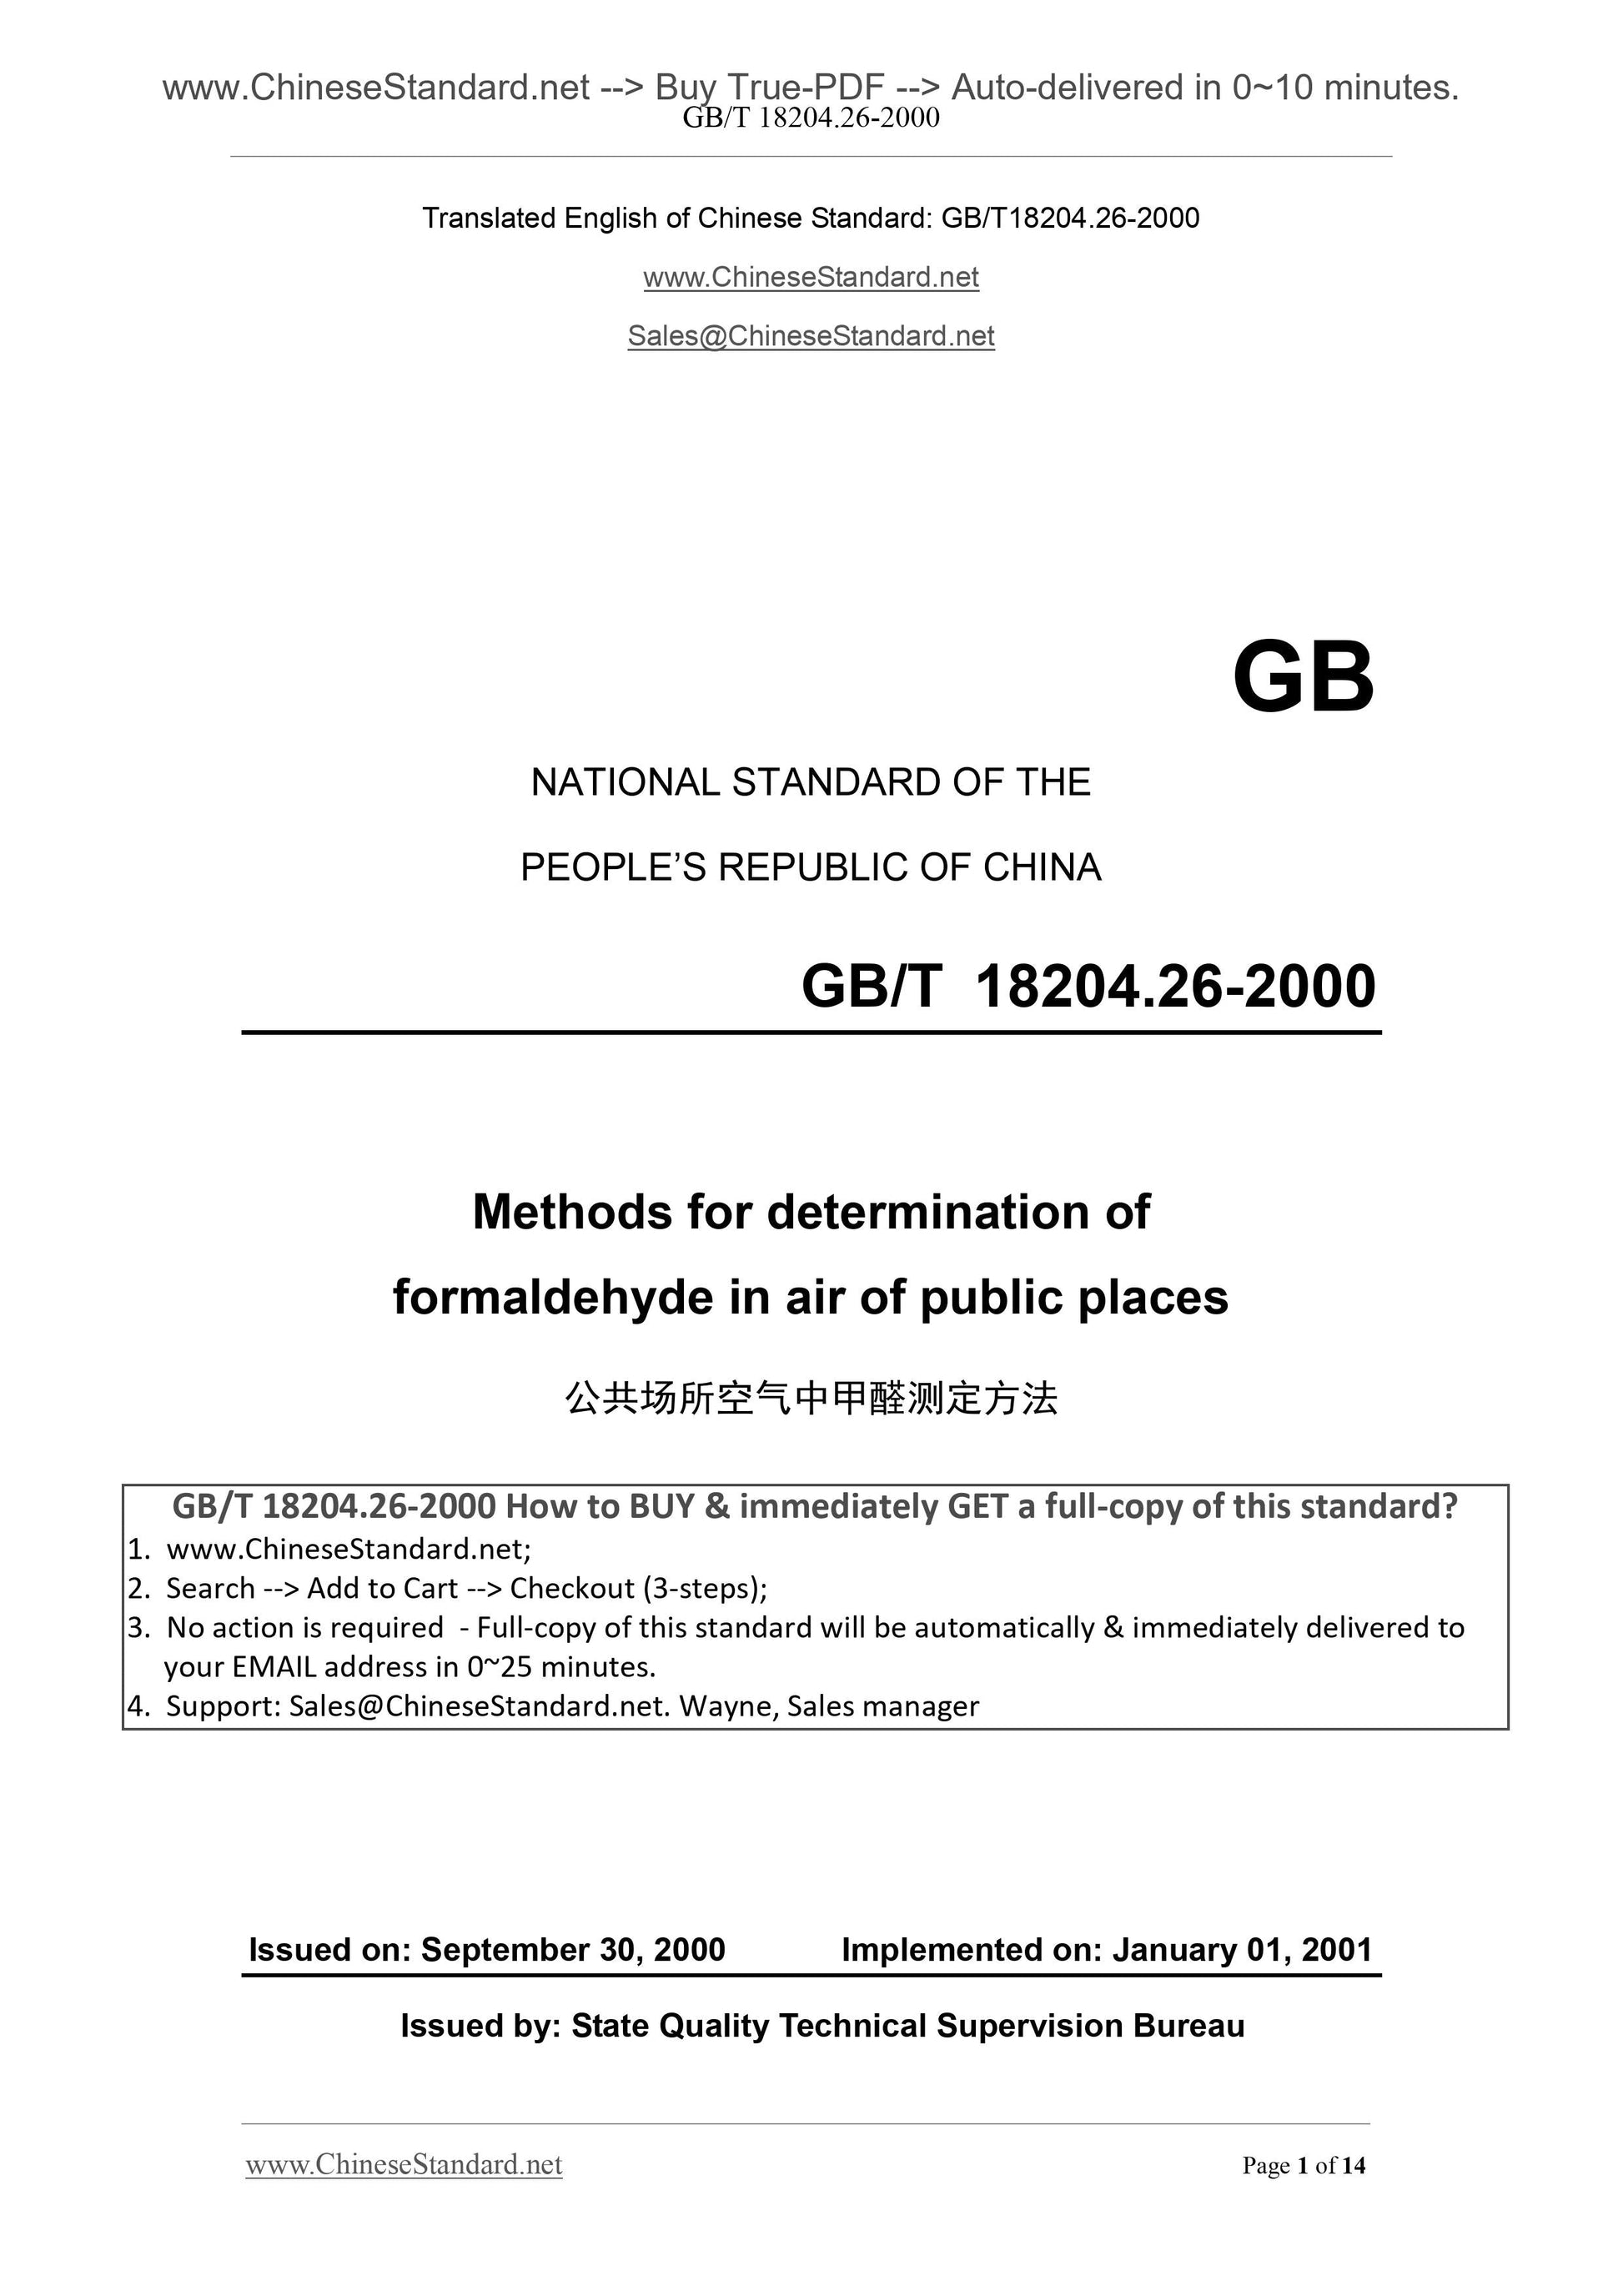 GB/T 18204.26-2000 Page 1